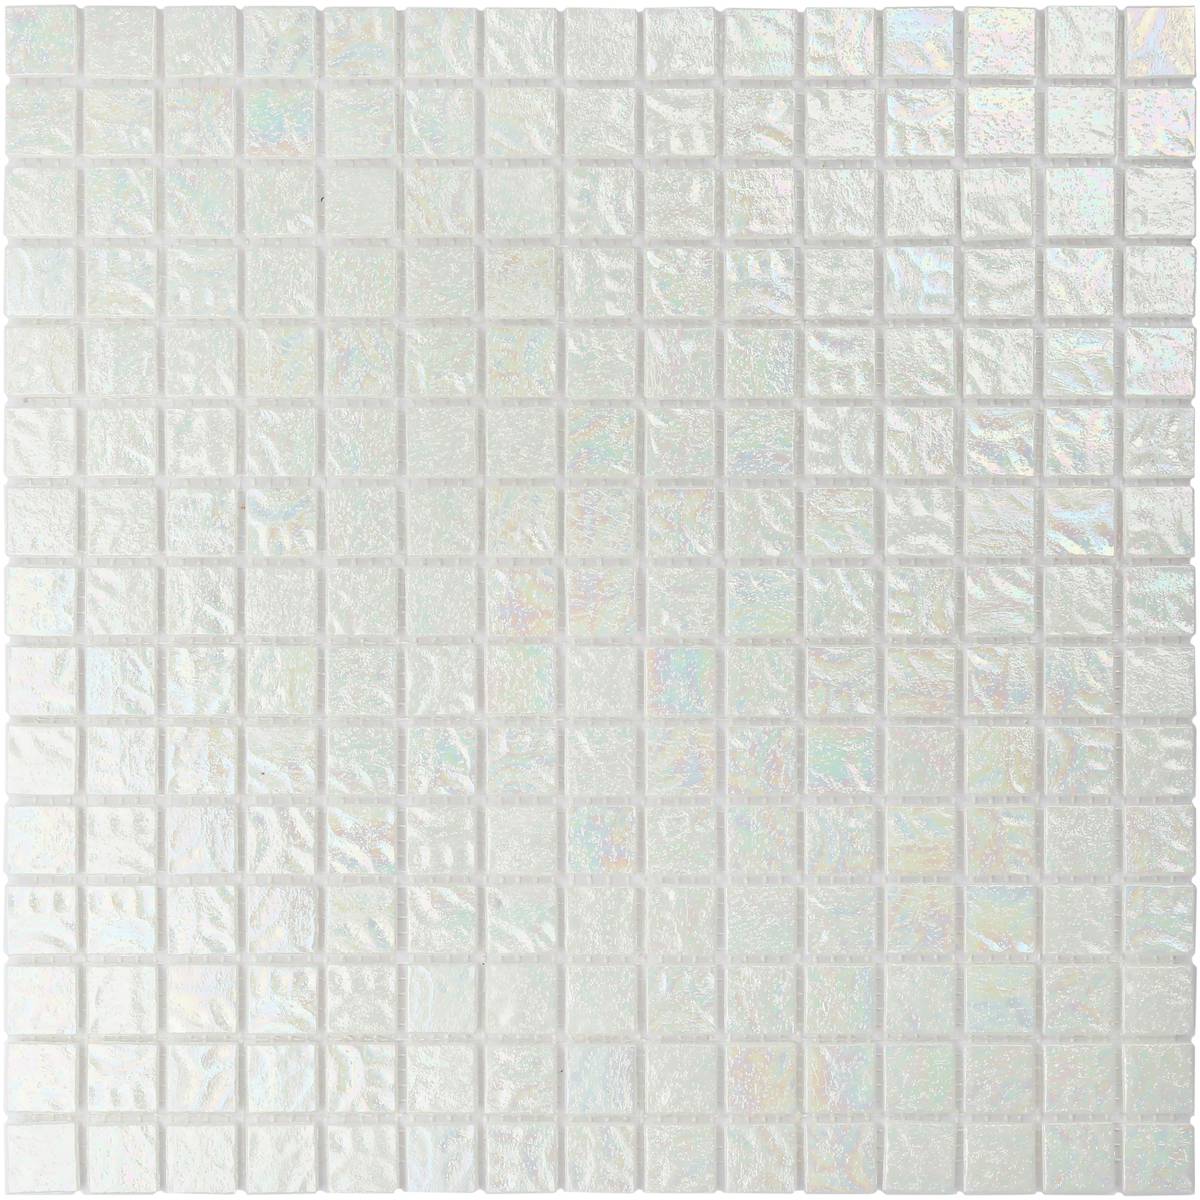 Wavy Glass mosaic tiles for swimming pool